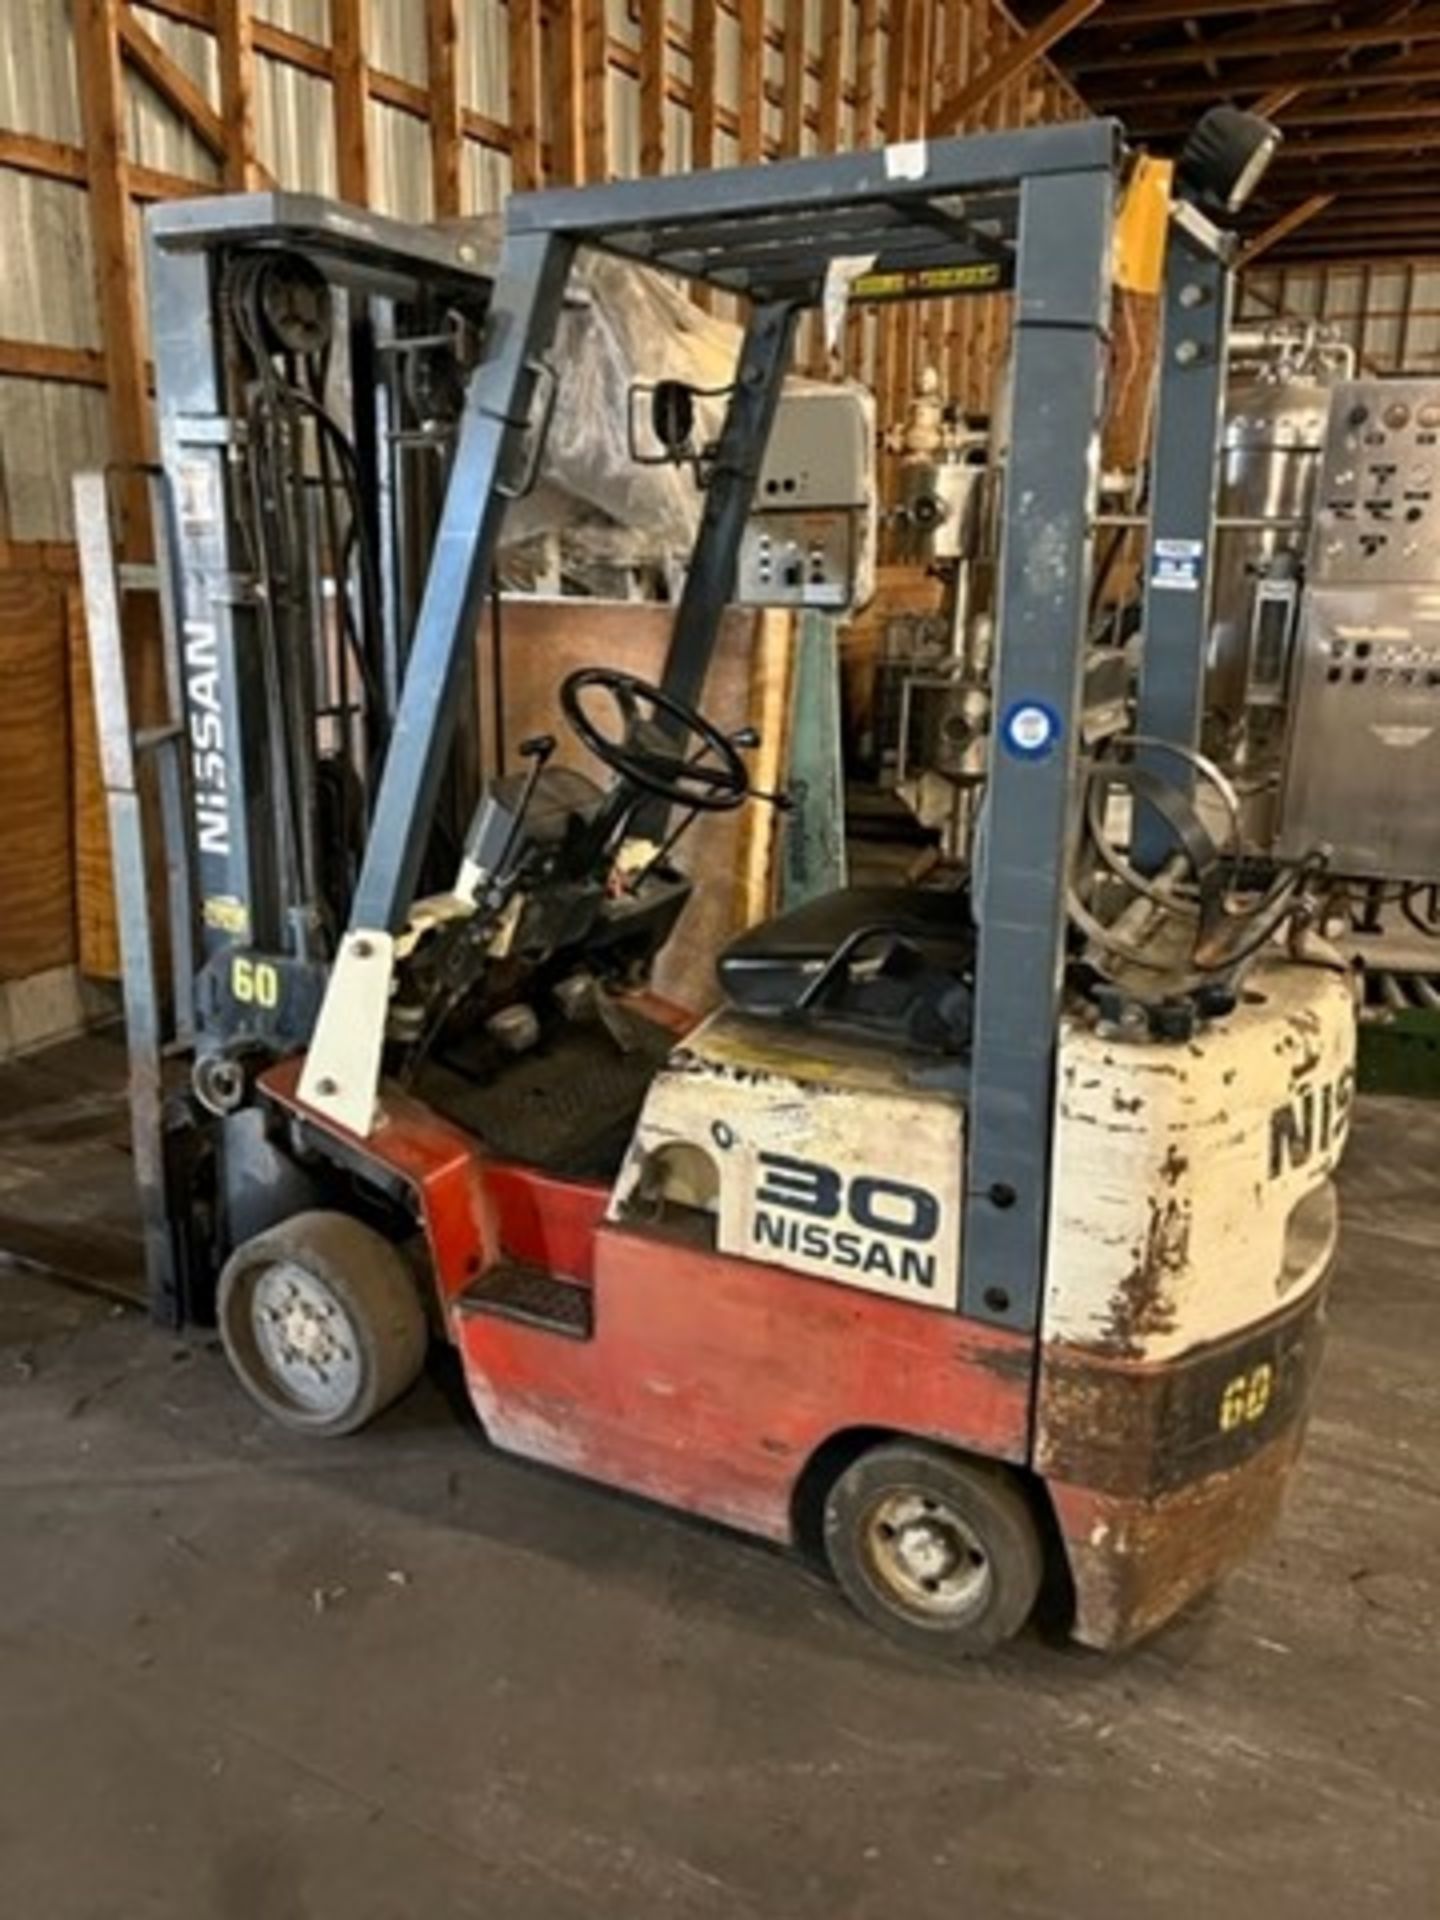 Consignment Item - located in Breese IL: Nissan 30 forklift #60